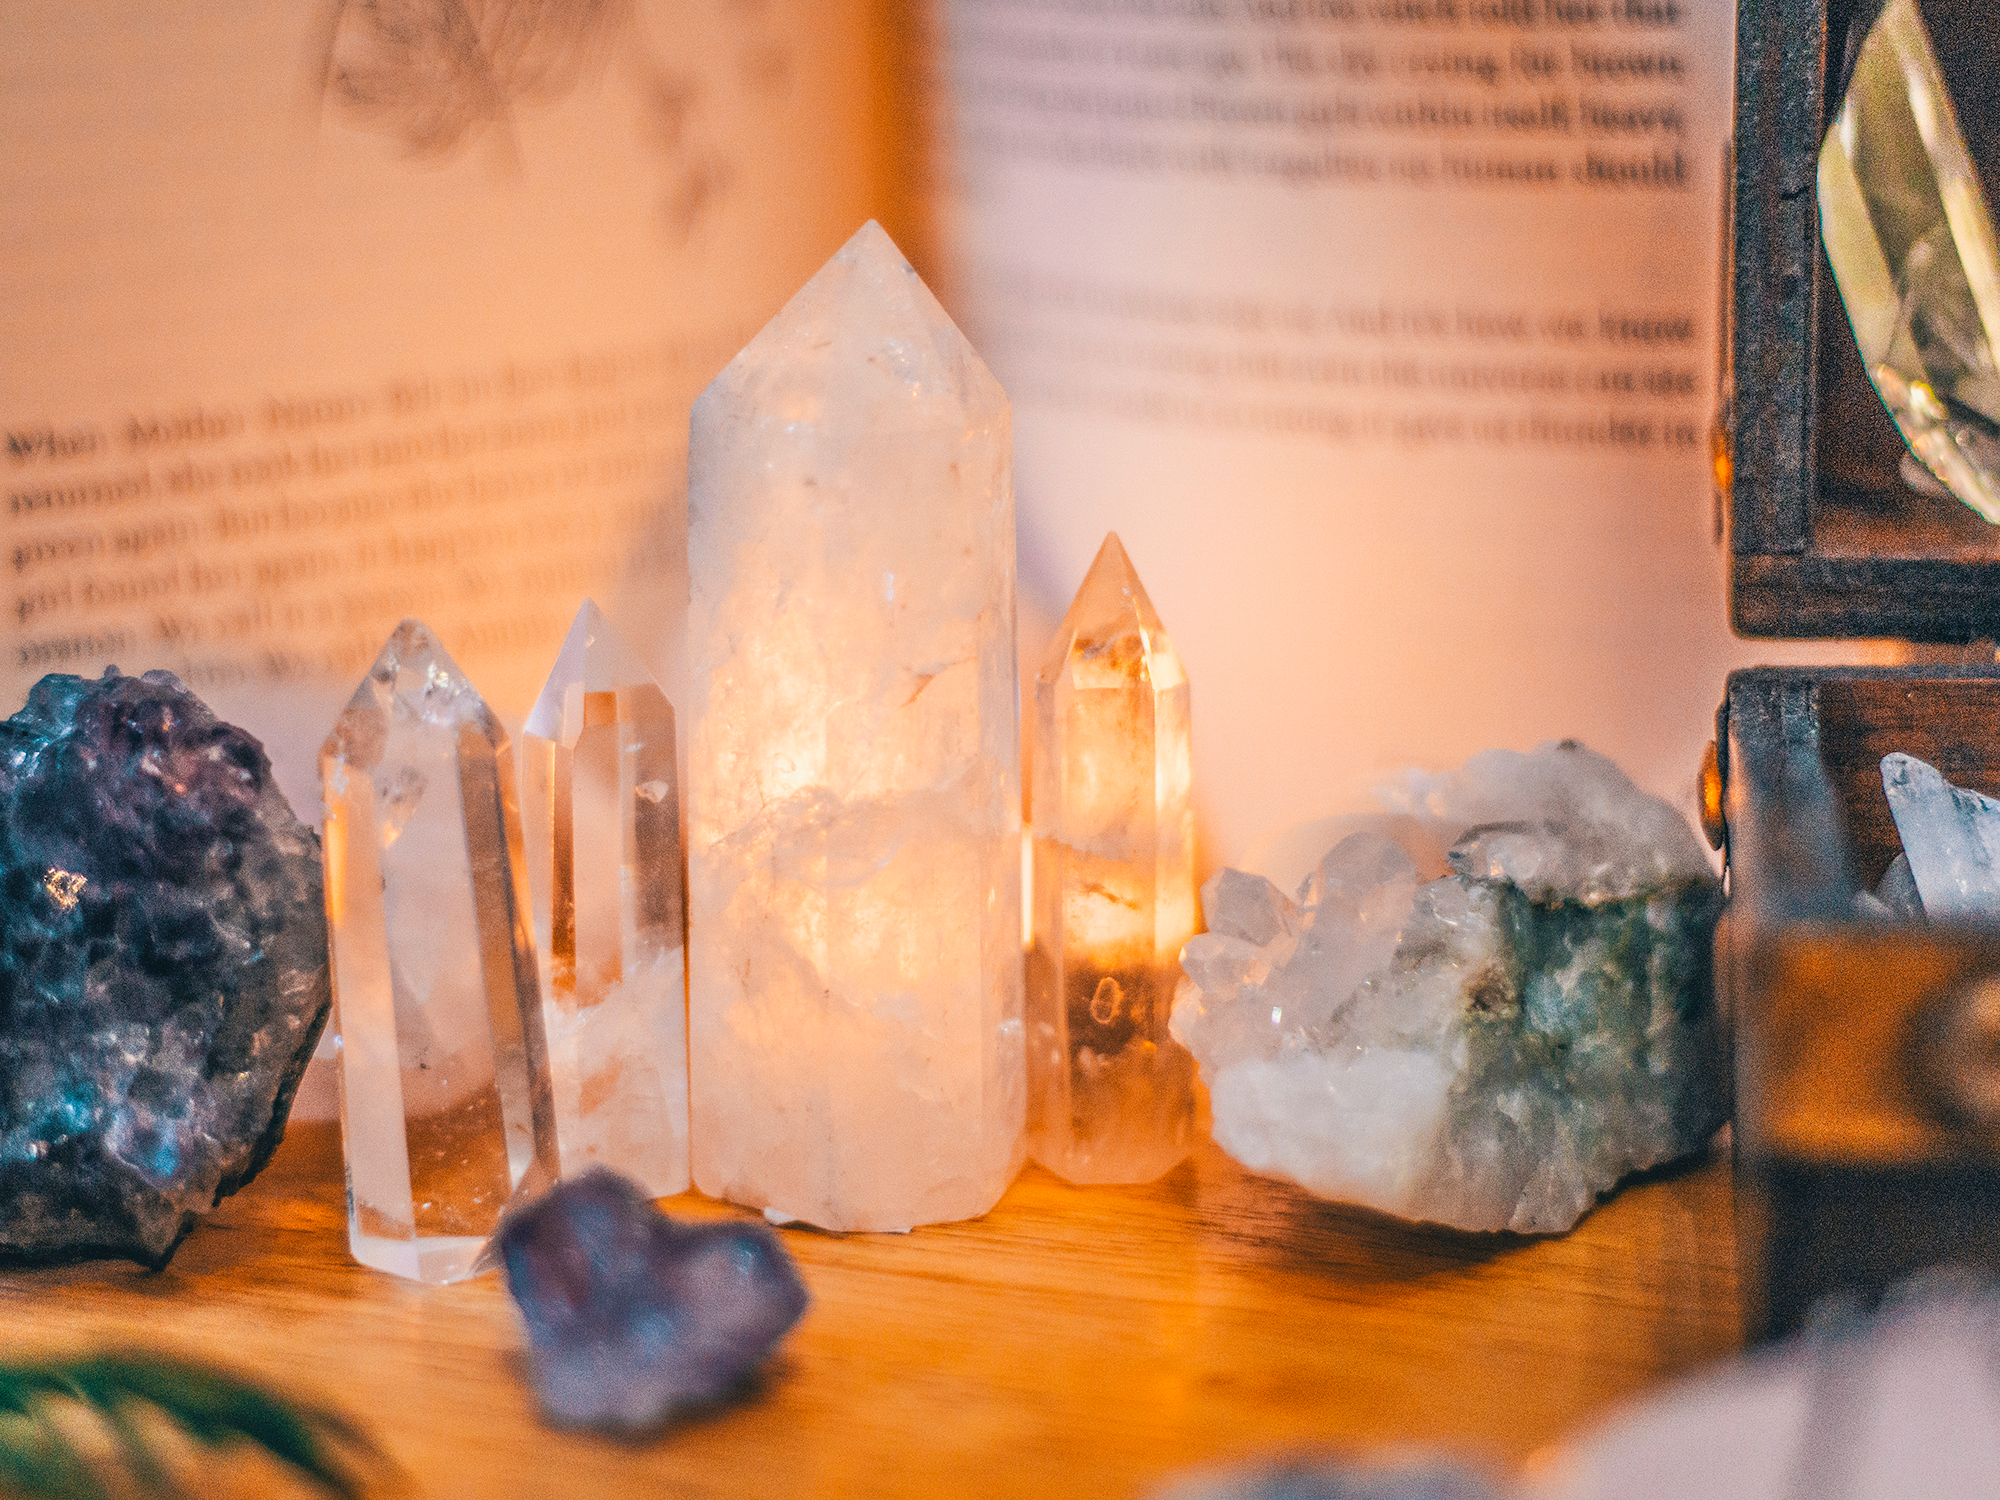 HOW TO TAKE CARE OF YOUR HEALING CRYSTALS?